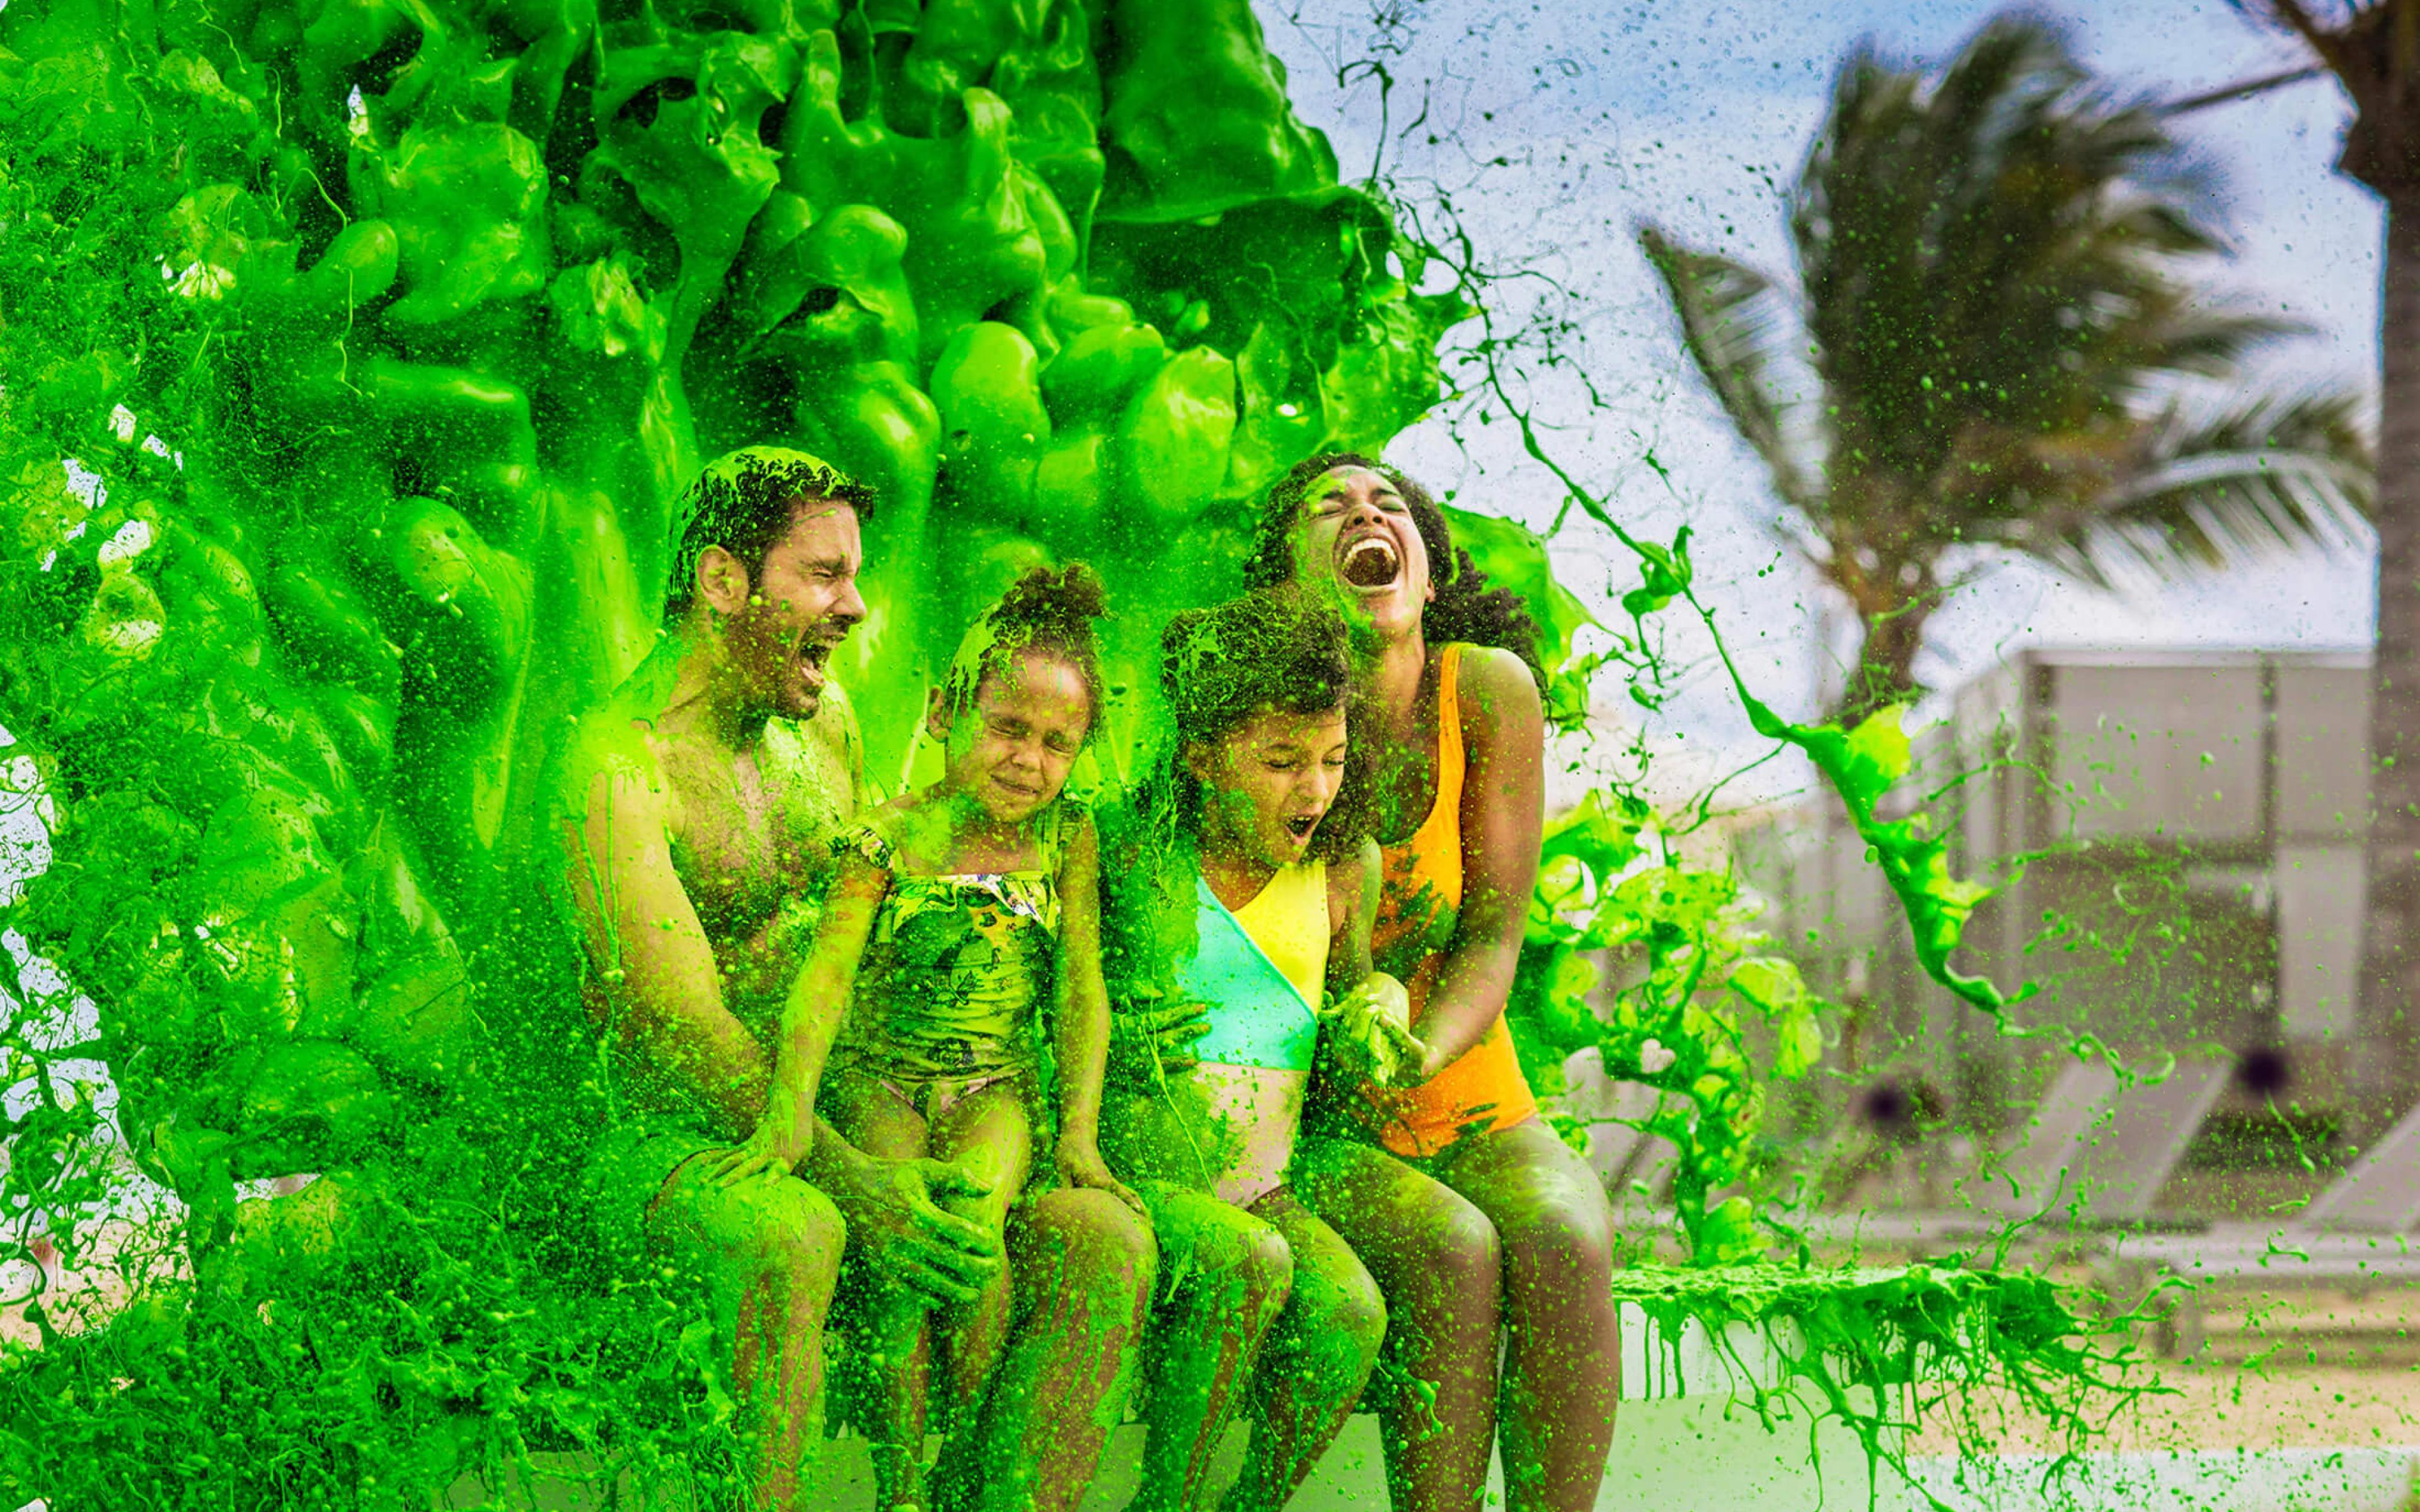 Family being splashed with slime